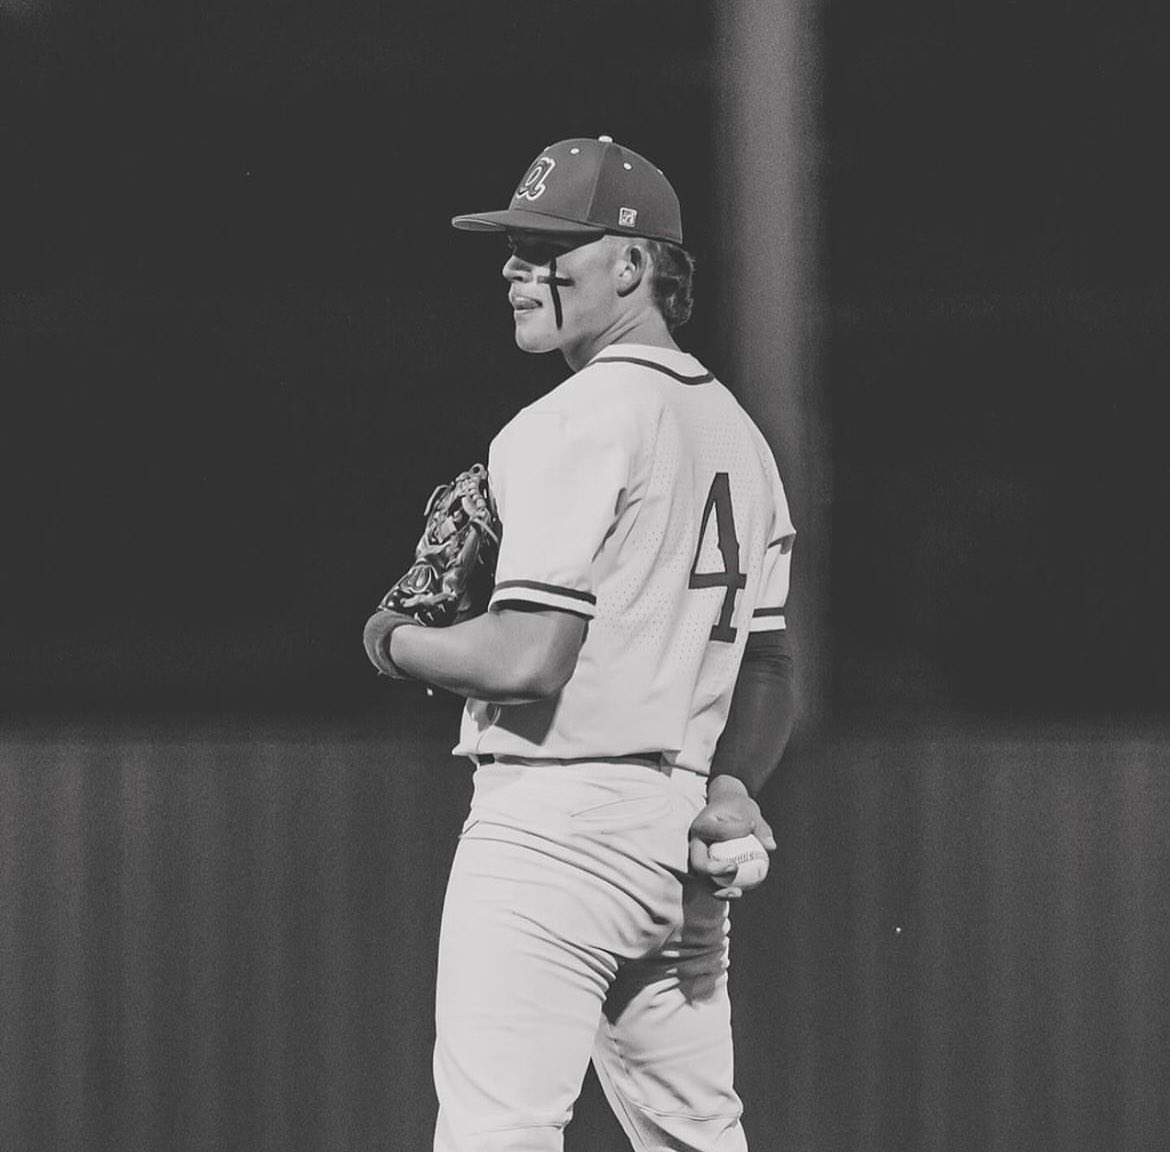 Next up! Week 31 1st Phorm AOW Nominee: Brady Coe, P, Allen High School The Abilene Christian commit tallied up 10 strikeouts in 7 innings, while giving up 4 hits with 0 earned runs in a 4-1 win.